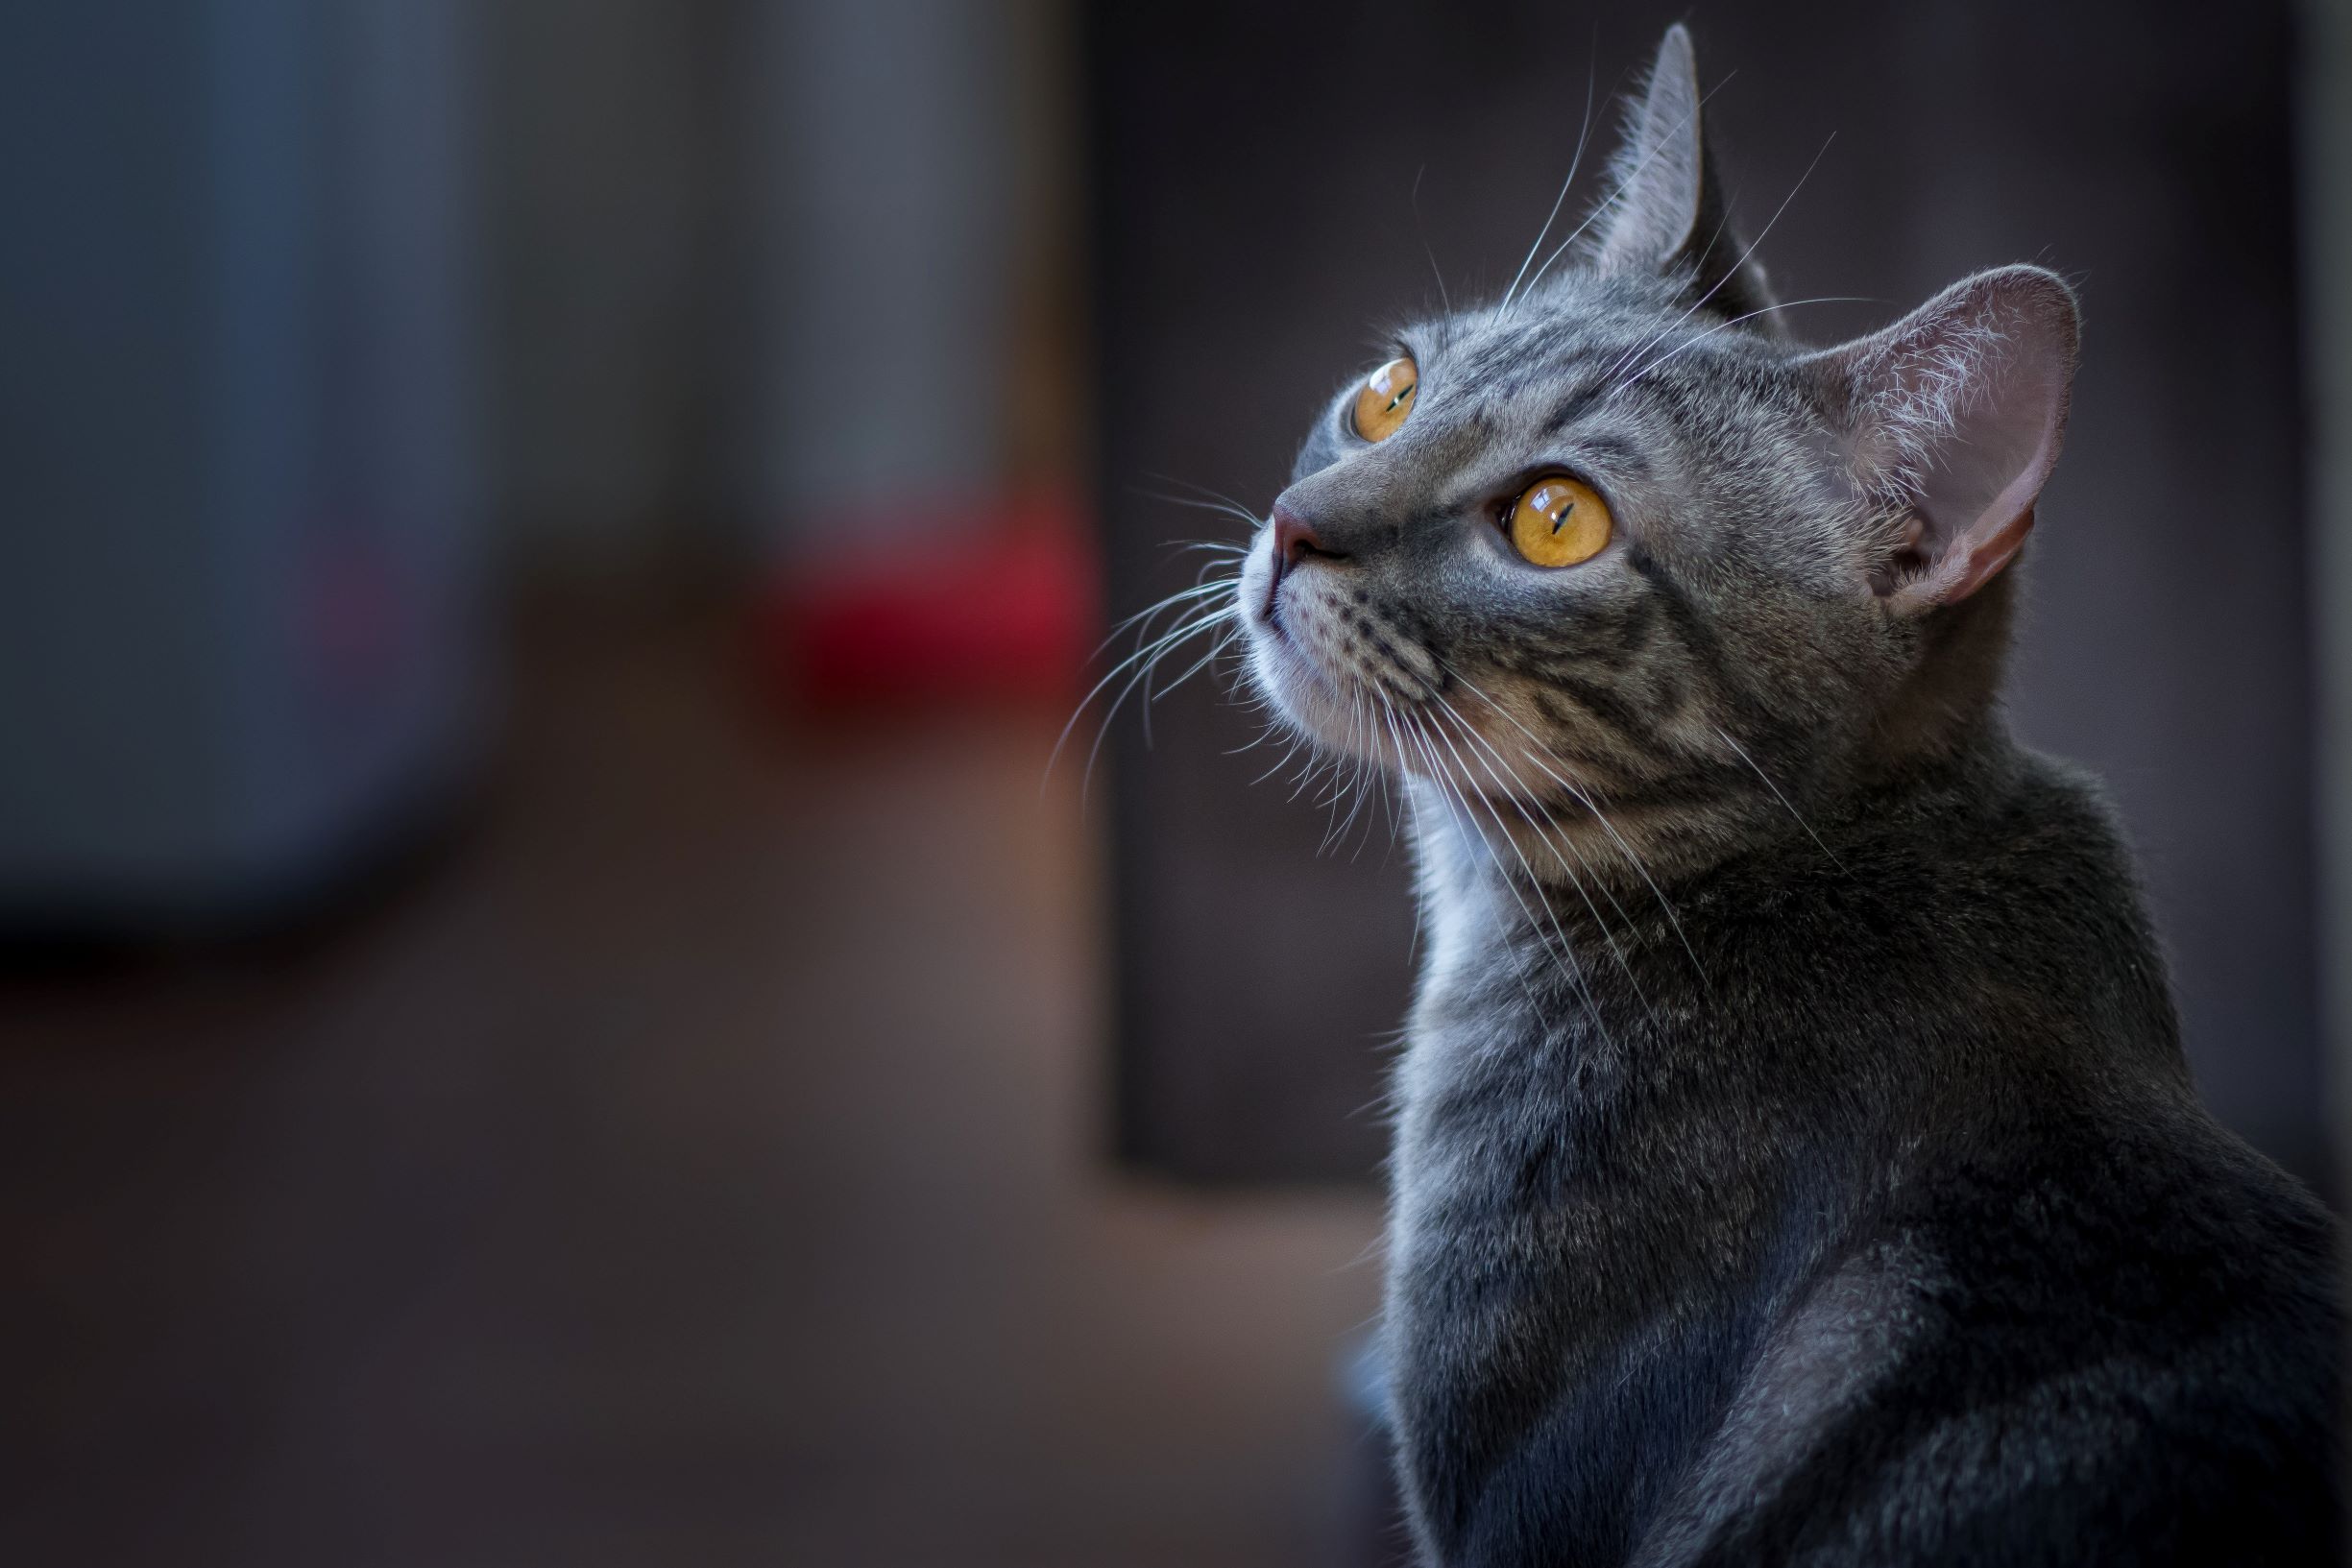 Daydreaming cat. Photo by Matheus Queiroz on Unsplash.